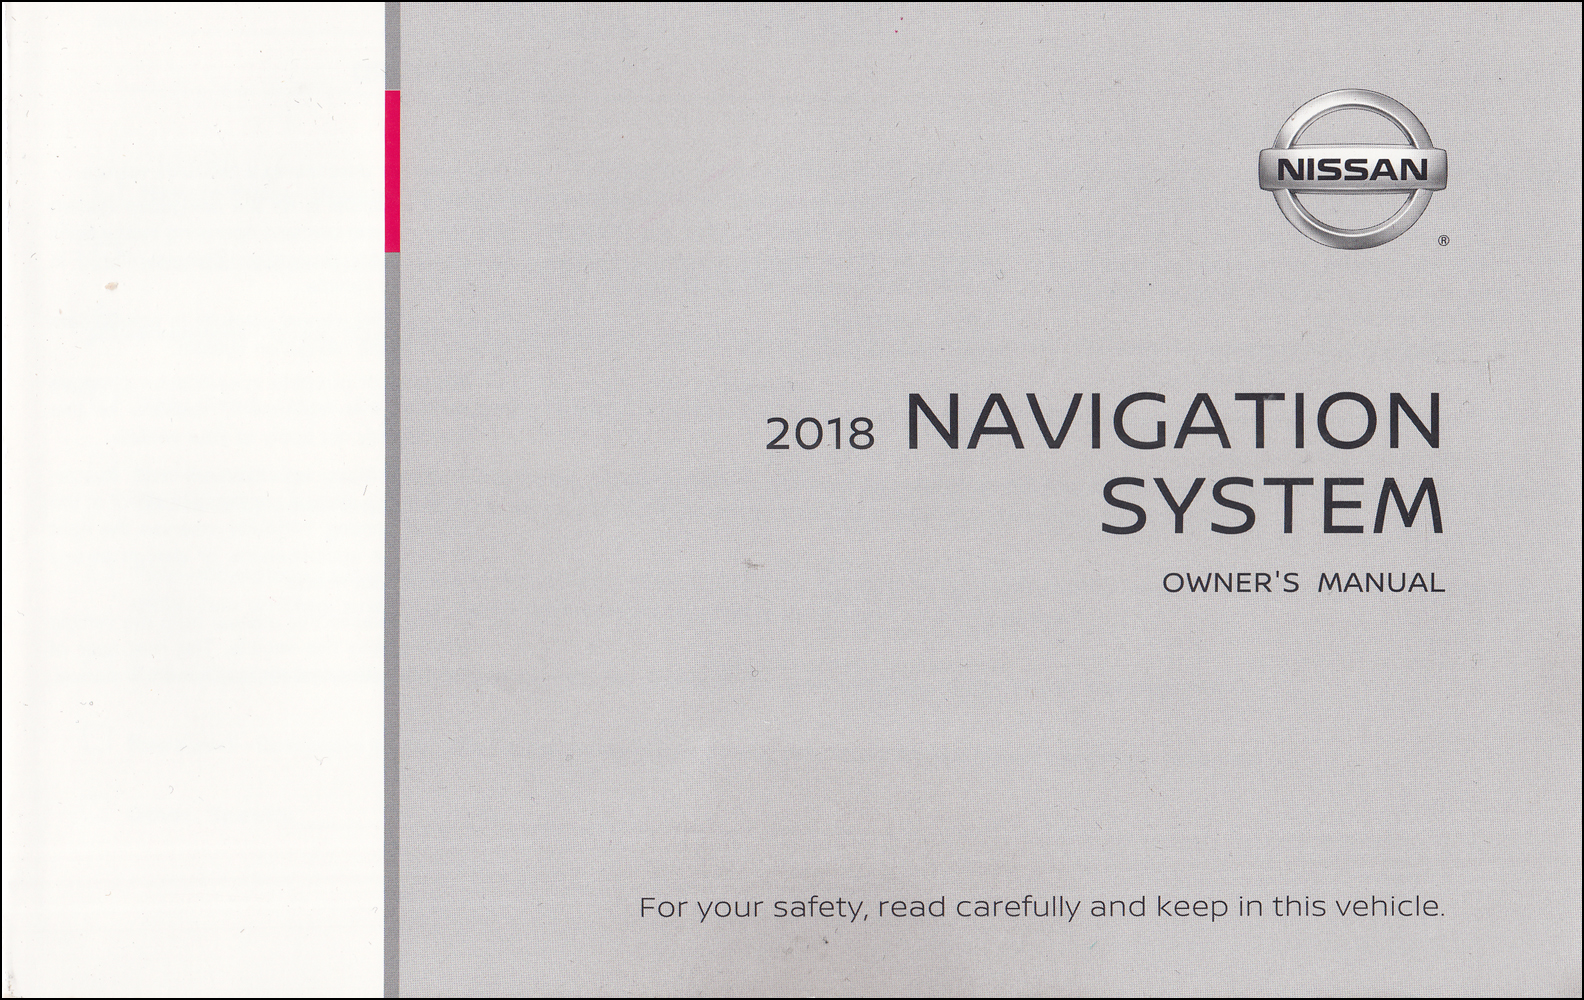 2018 Nissan L2KN Navigation System Owners Manual - Frontier & NV